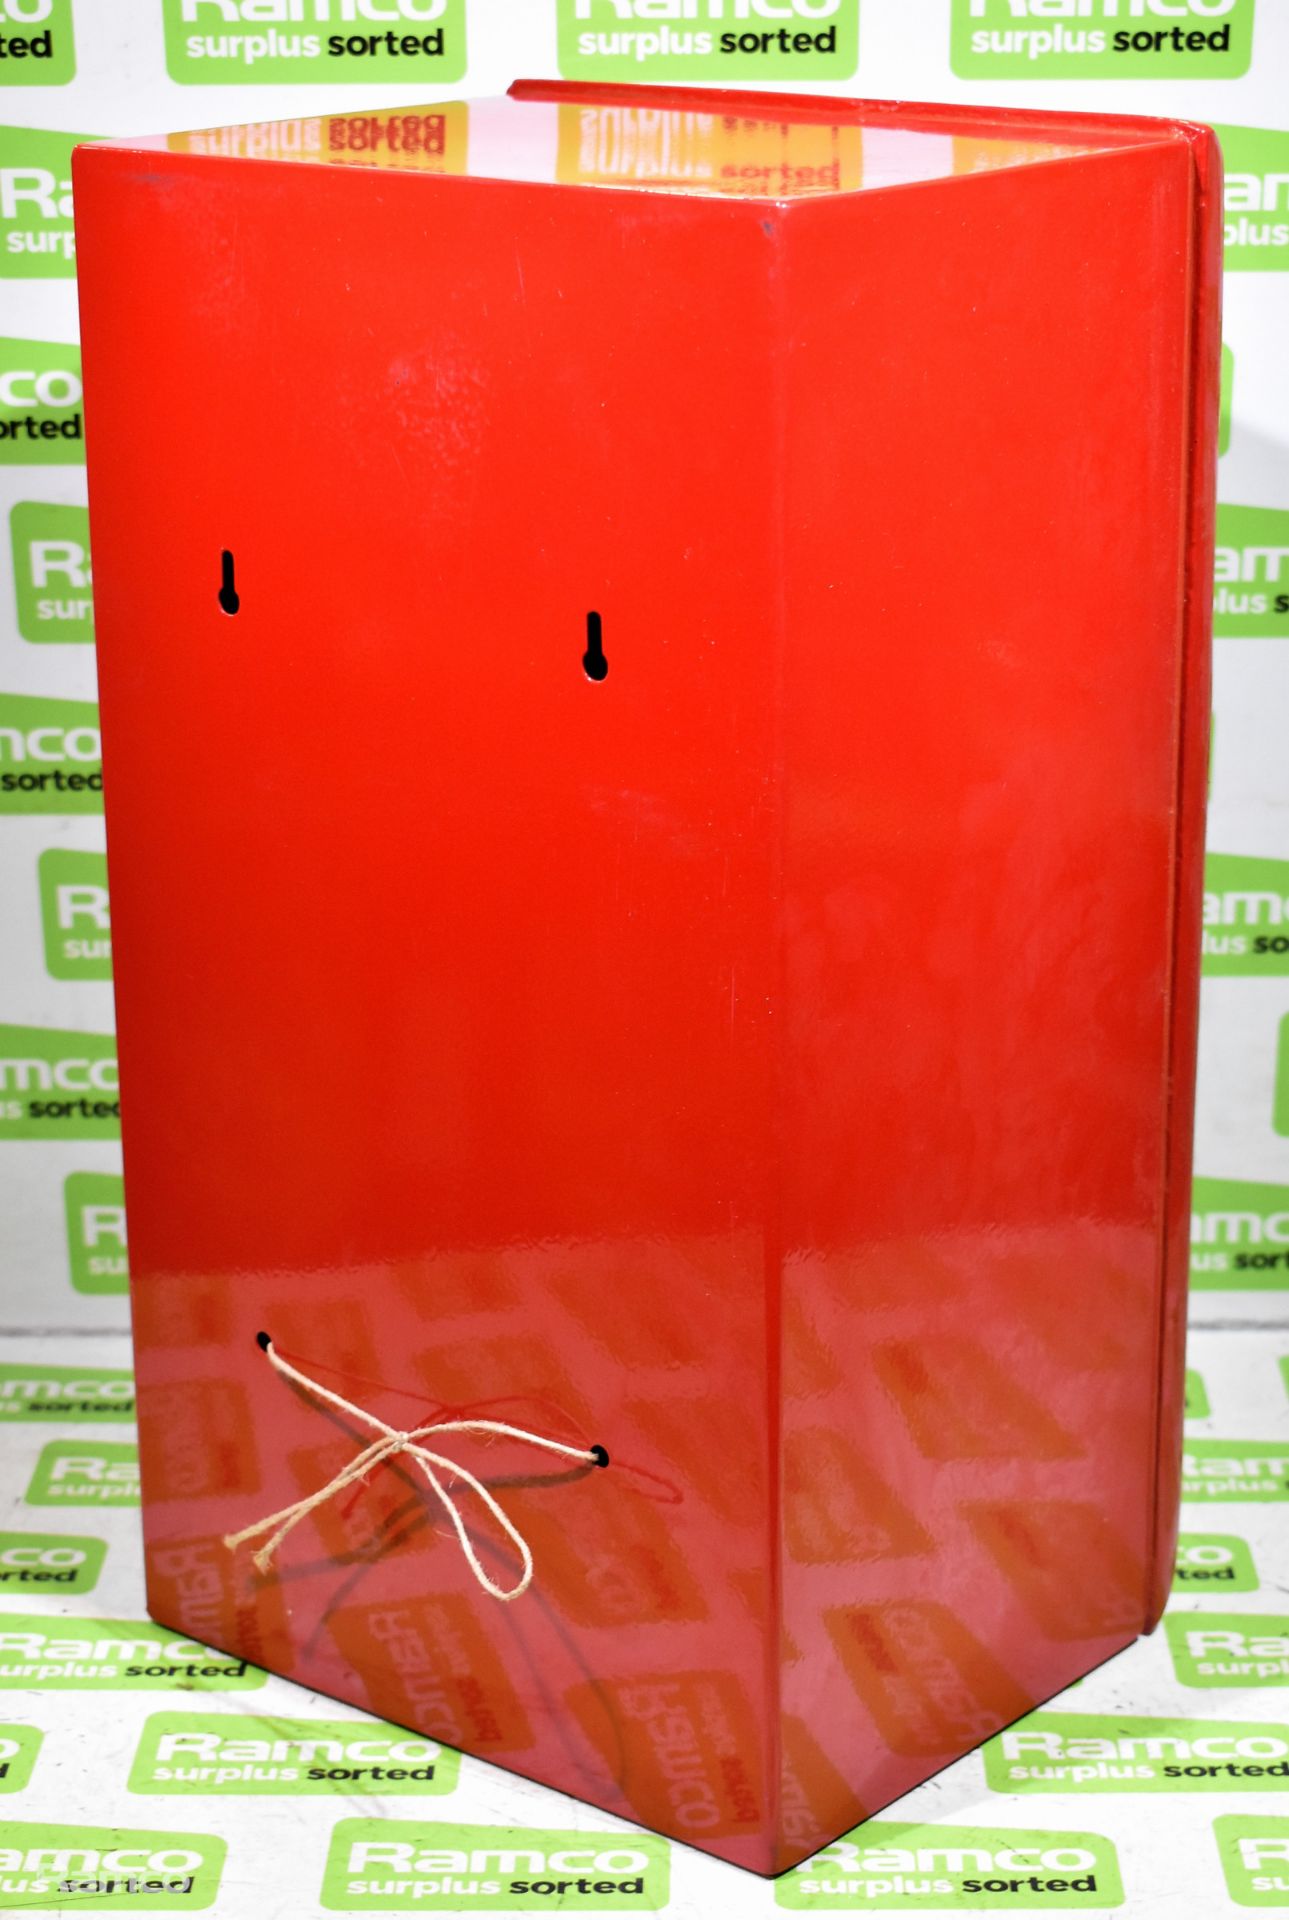 Cast steel red post box - novelty H 40 x W 20 x L 20 cm - Image 3 of 3